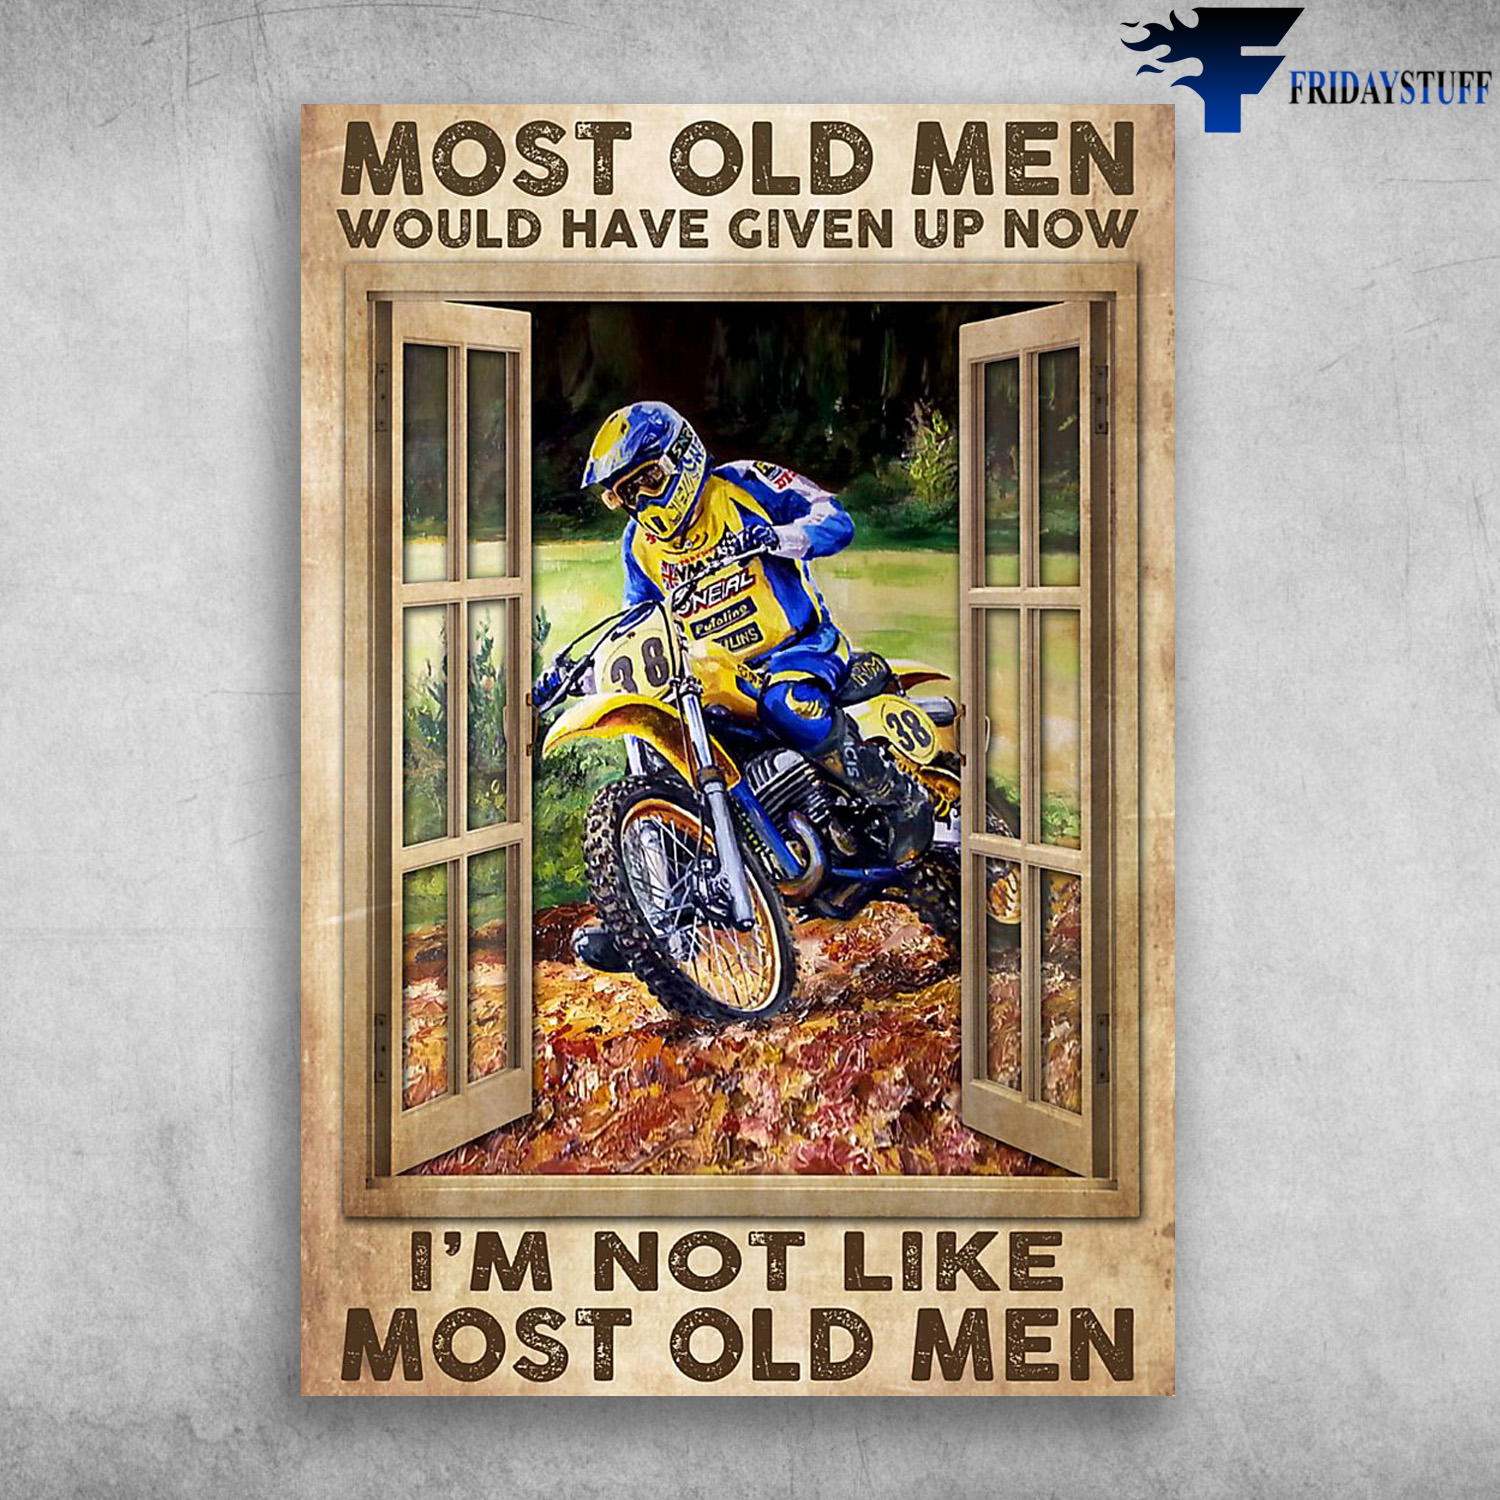 Motocross Man - Most Old Men Would Have Give Up Now, I'm Not Life Most Old Men, Dirt Bike